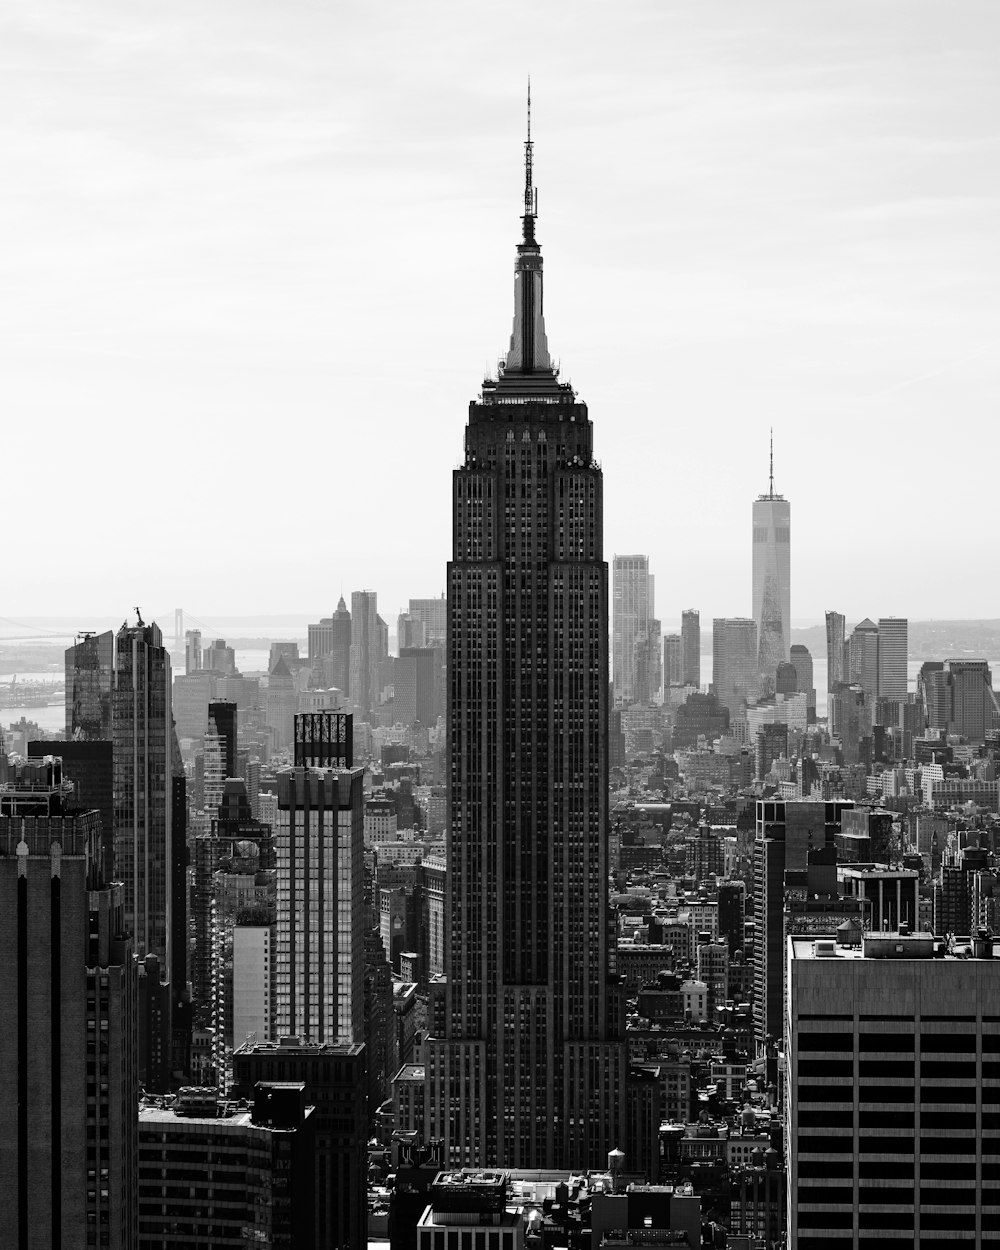 Empire State Building with tall buildings